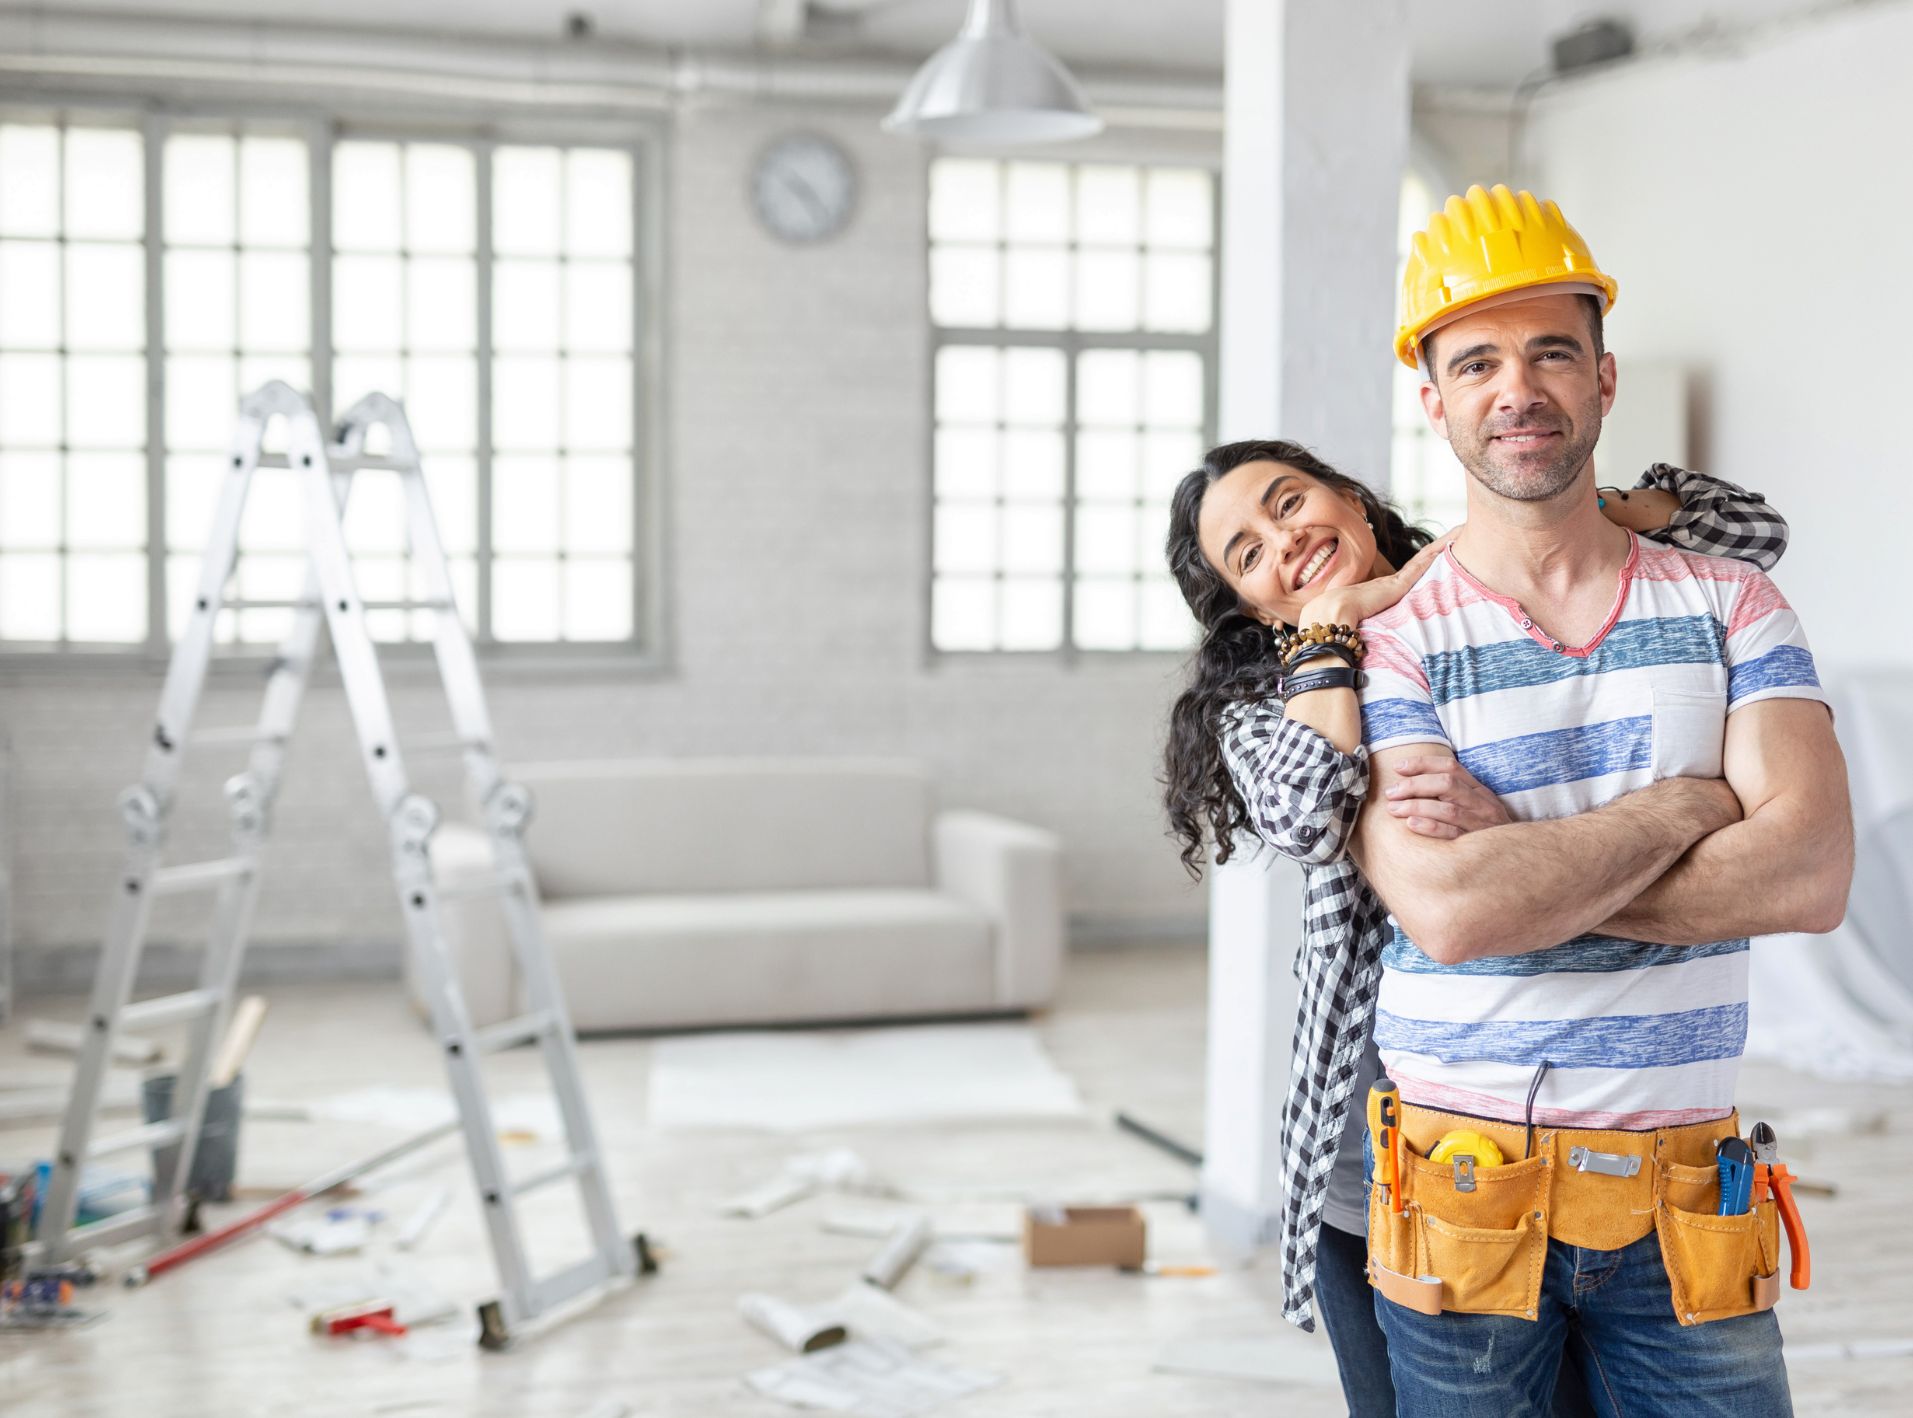 This is an image of a man and women standing in their living room that is being renovated